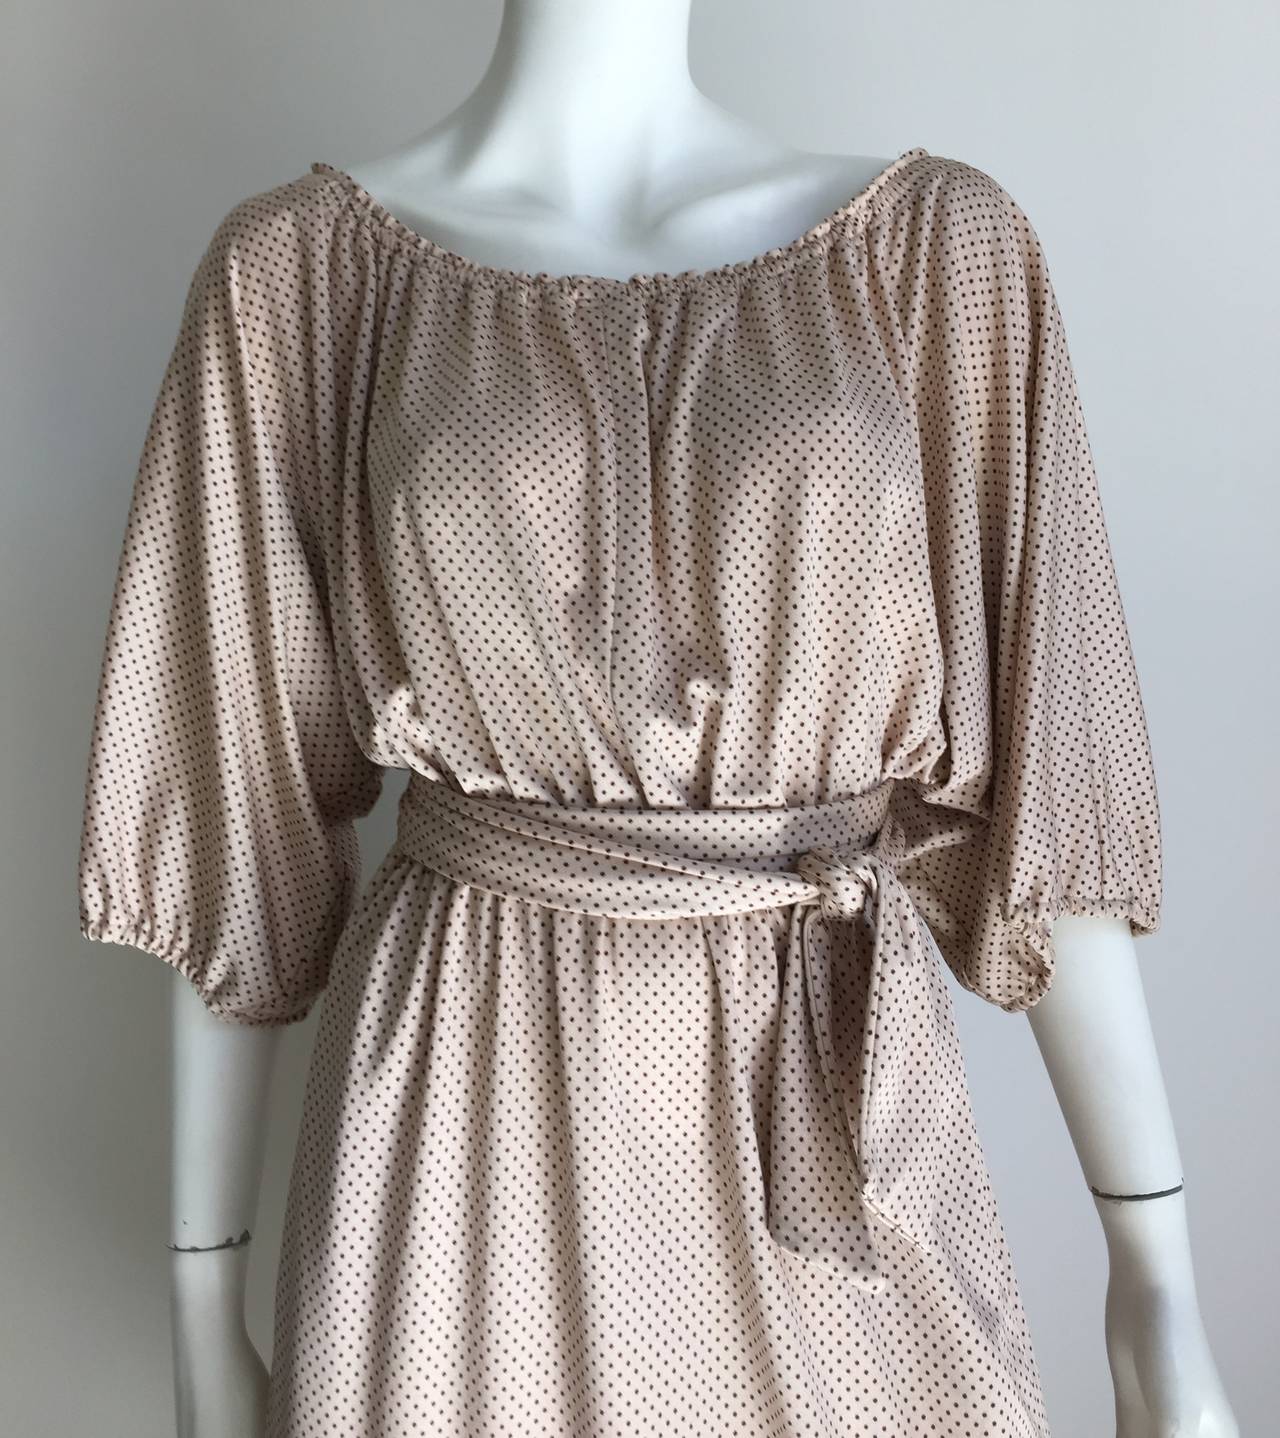 Hanae Mori 1970s polka dot scoop neckline dress with belt is marked size 4 but has elastic waistband which can easily accommodate size 4/6 but see measurements. Dress has pockets and is made in Japan.
Measurements are:
23" - 28" waist